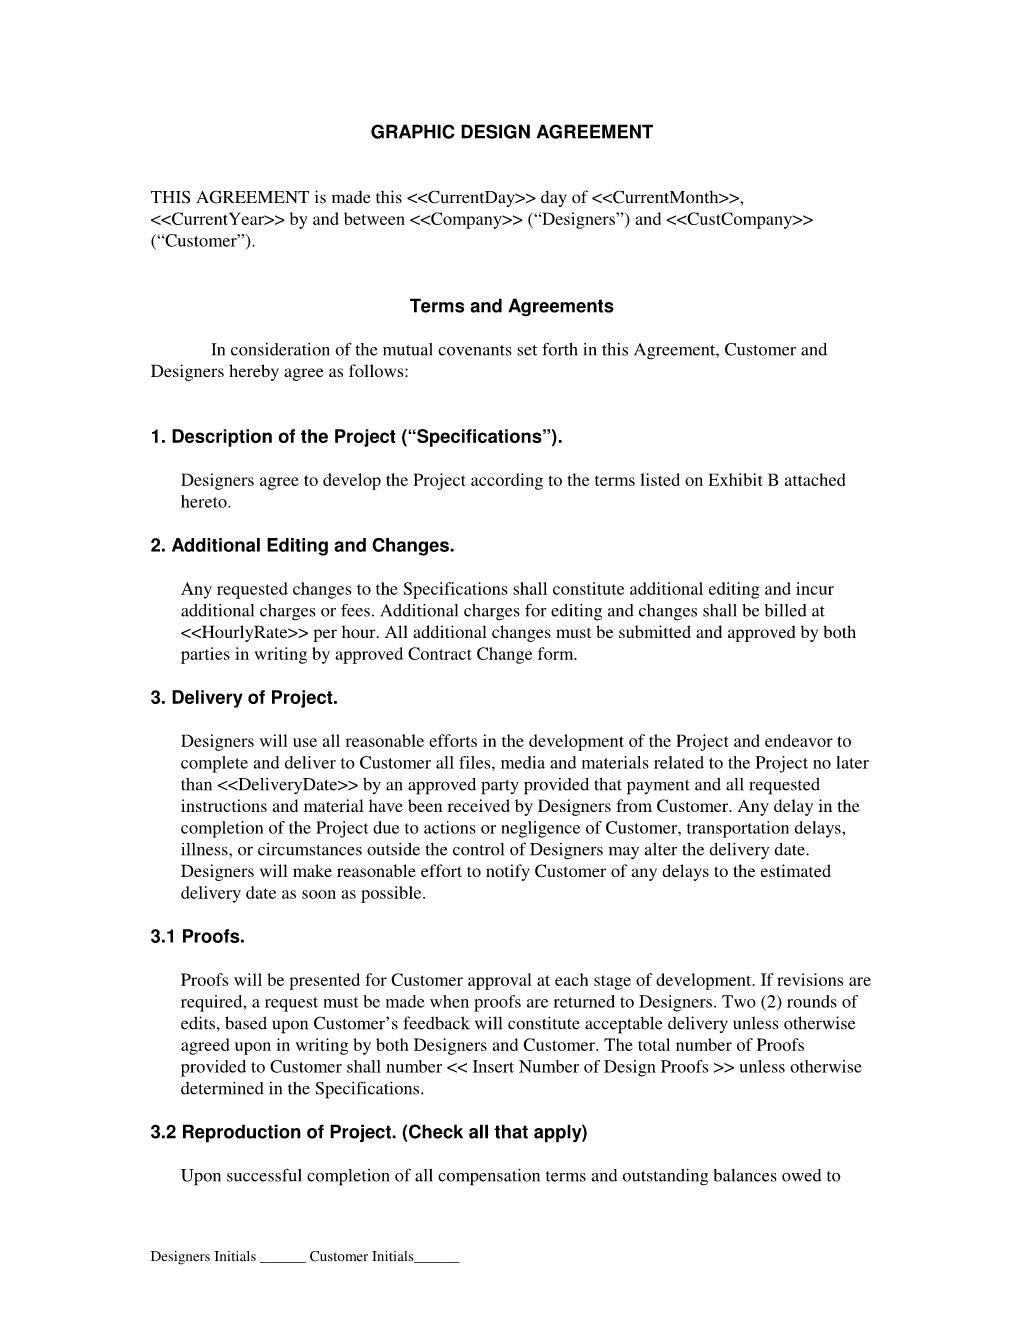 Applying For A New Job With Freelance Graphic Design Contract Document Agreement